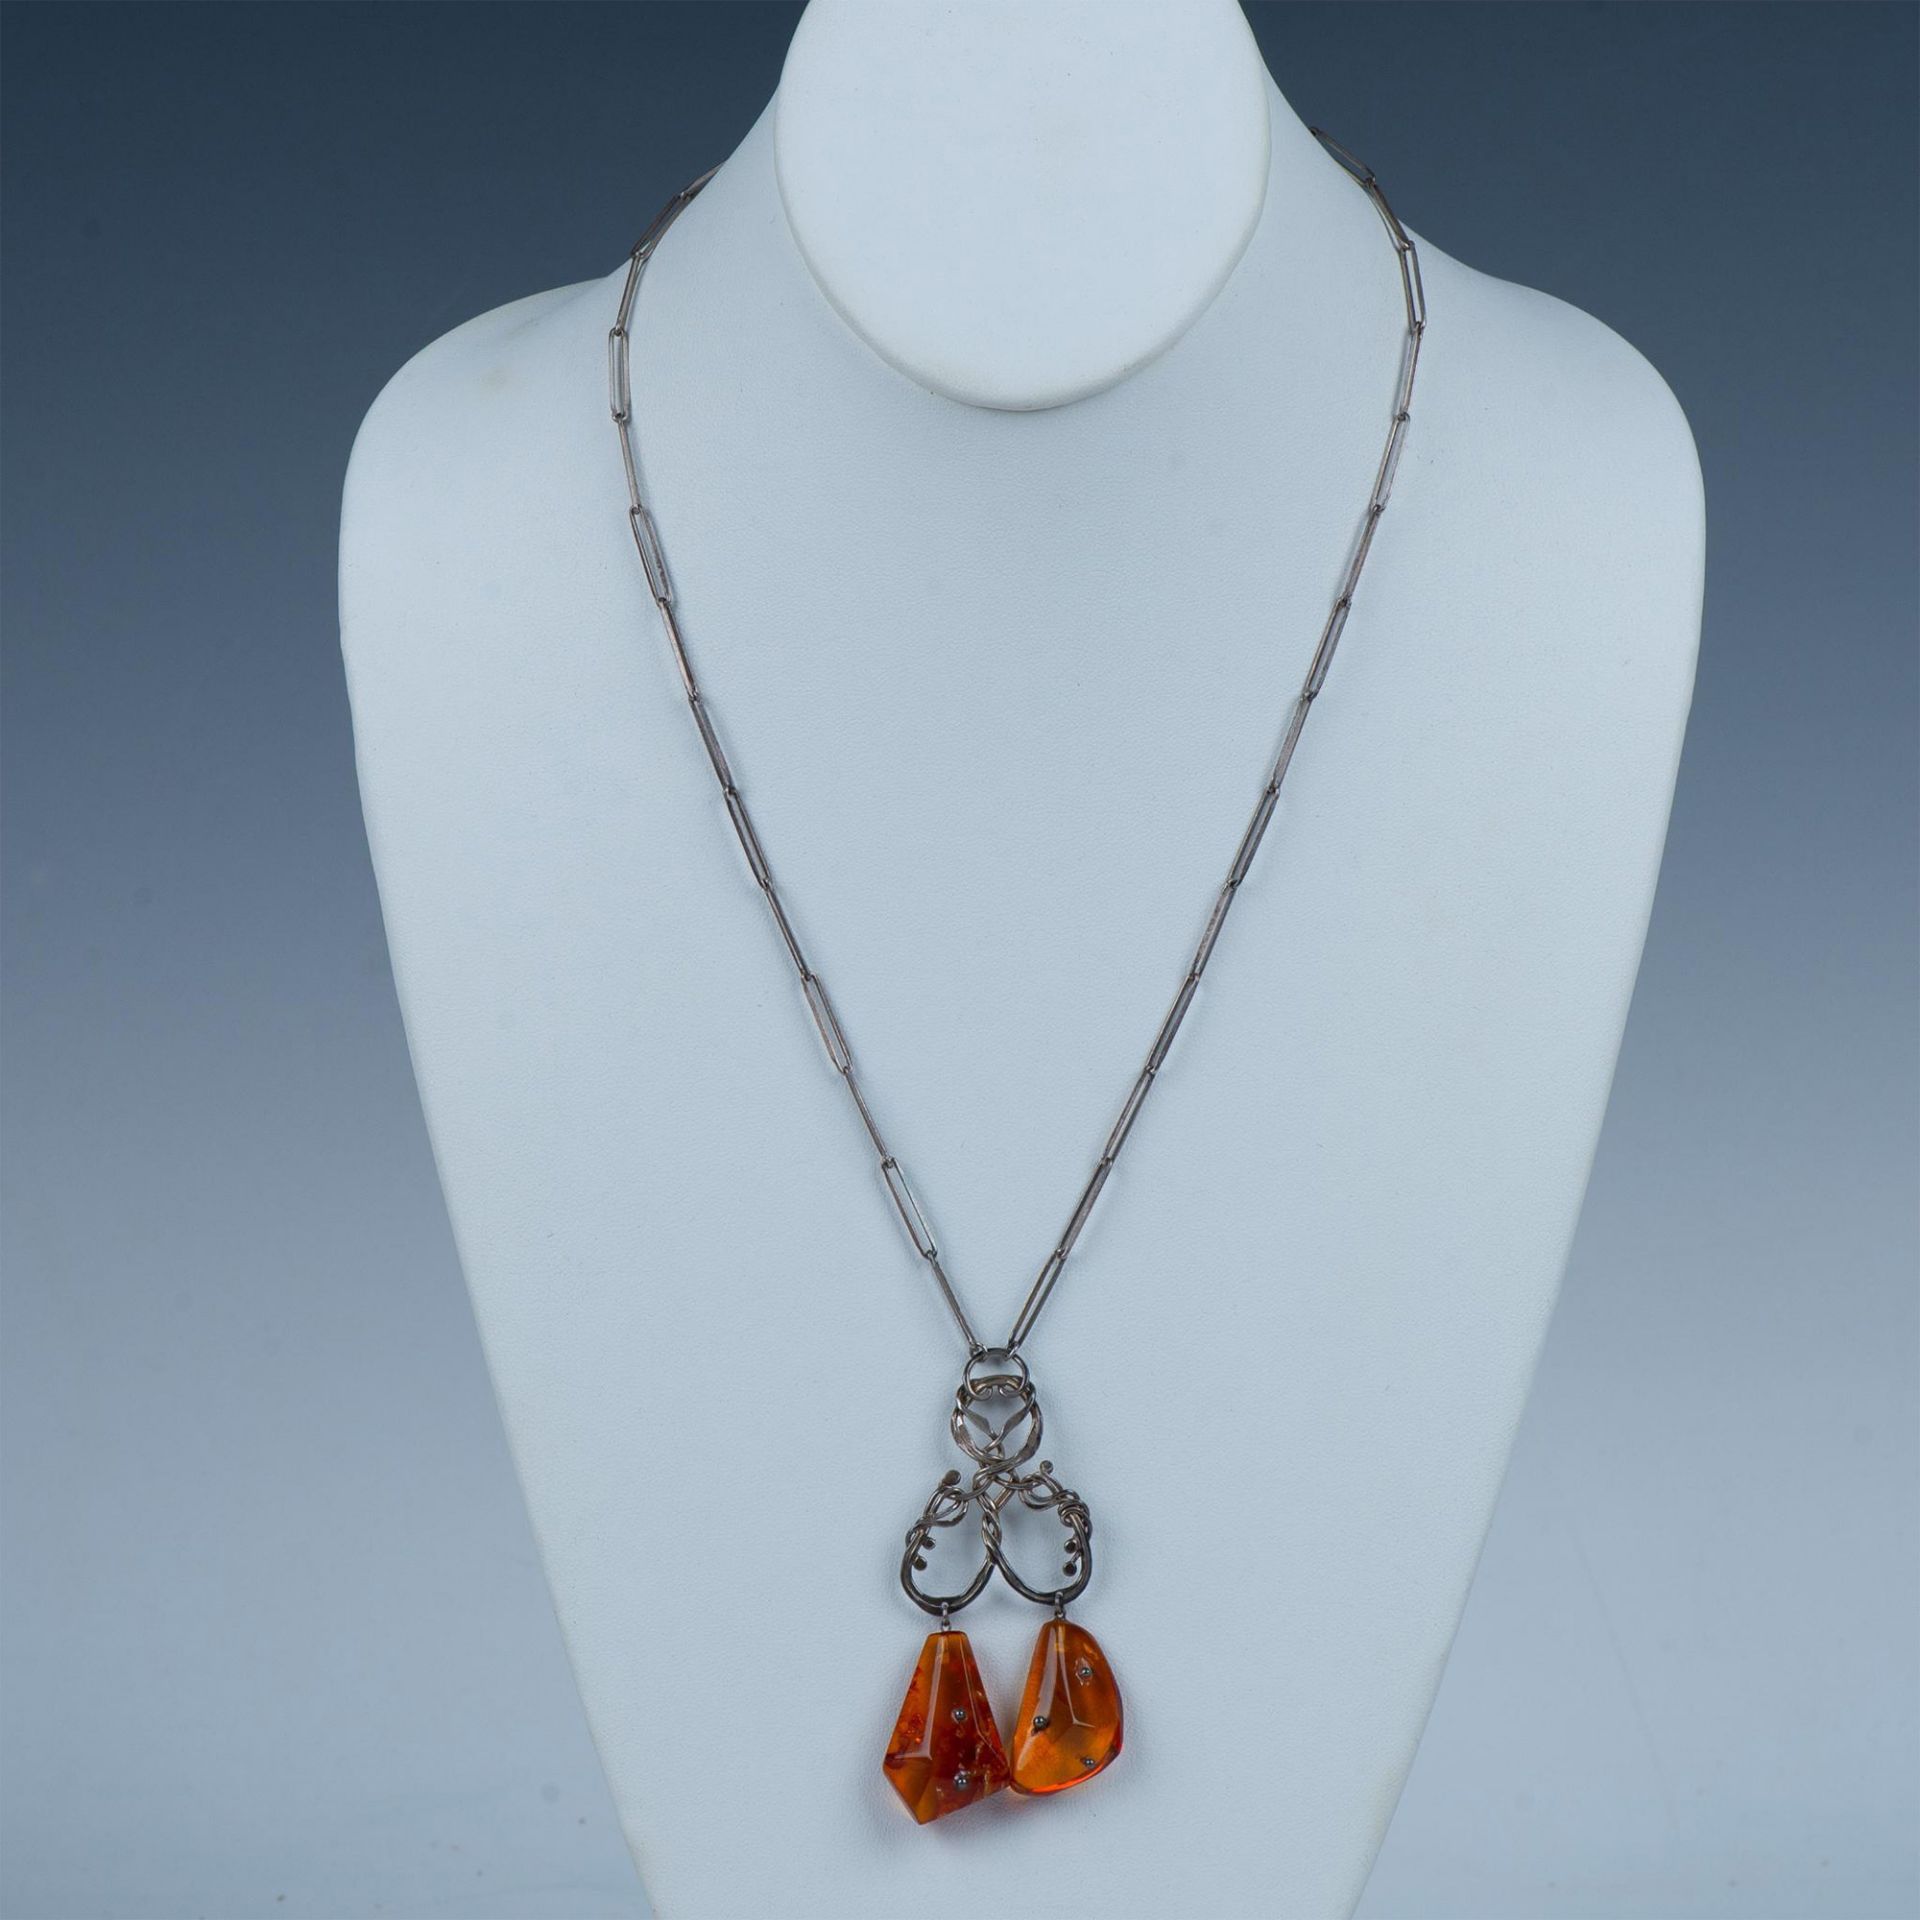 Victorian Amber & Sterling Silver Wire Wrap Necklace - Image 2 of 3